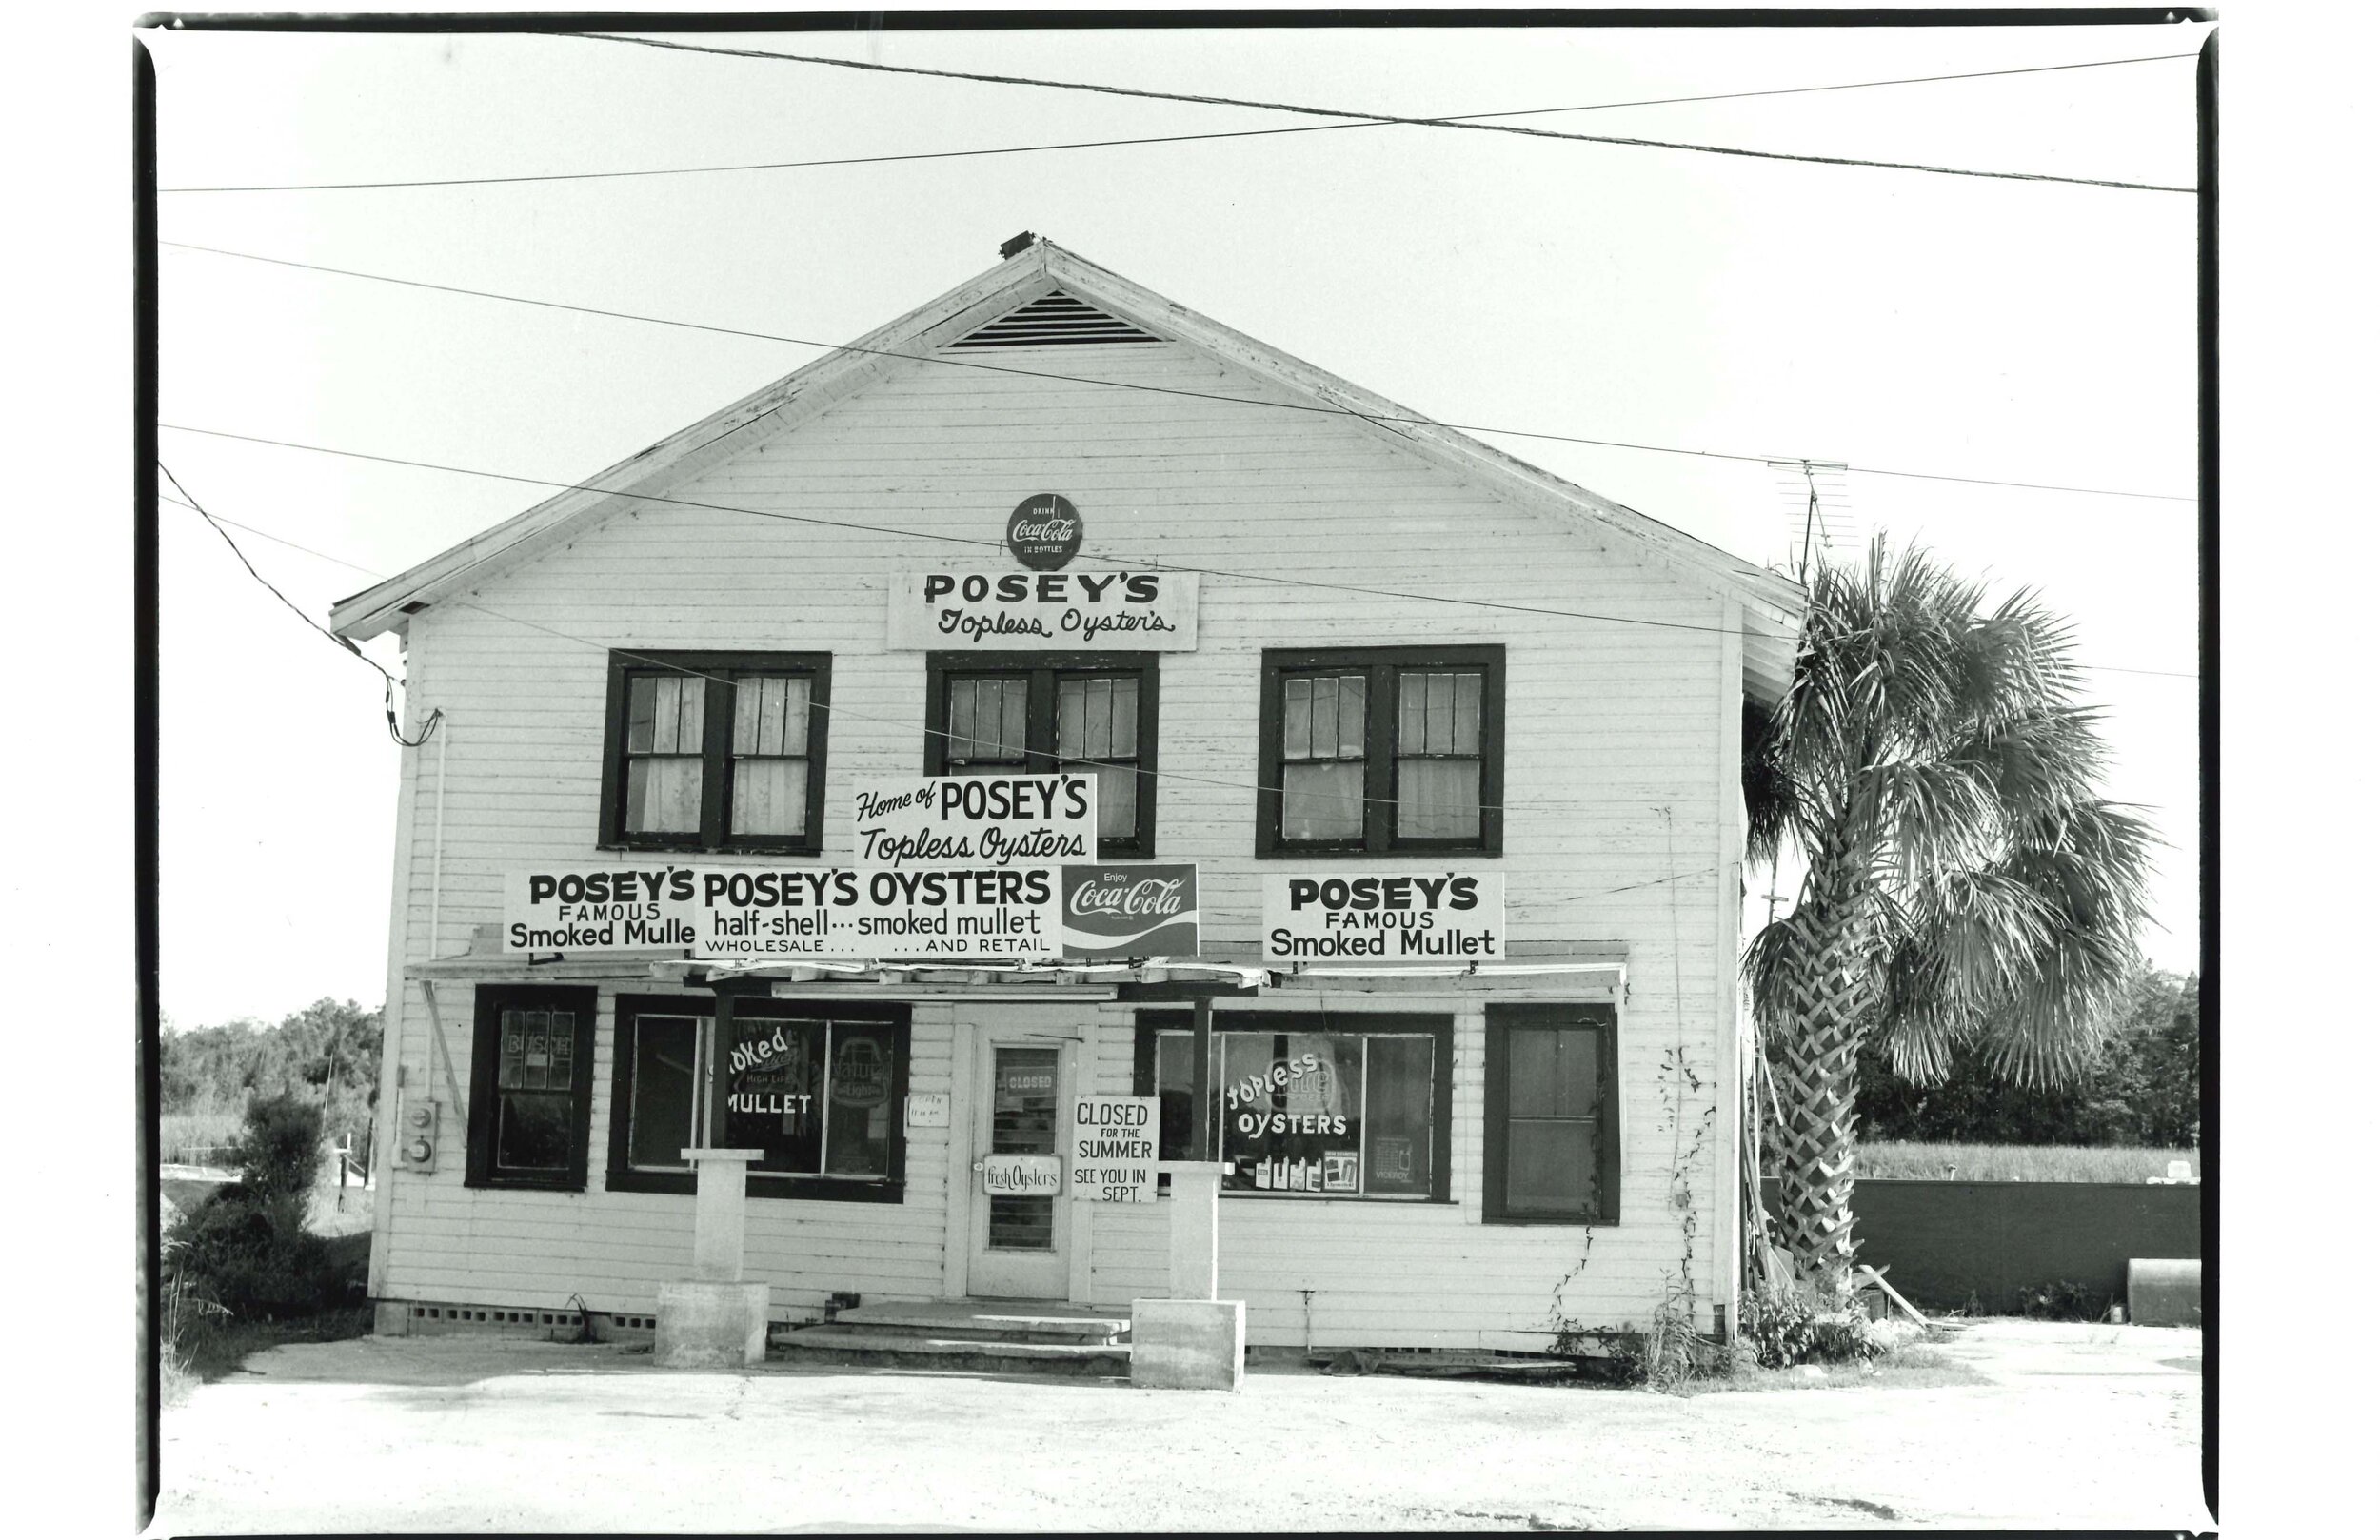   Posey's Topless Oysters Saint Marks, FL  Image: 1982/printed: 2020 Gelatin silver print 8 3/4 x 11 3/4 in. (image size)  The Do Good Fund, Inc., 2020-075  